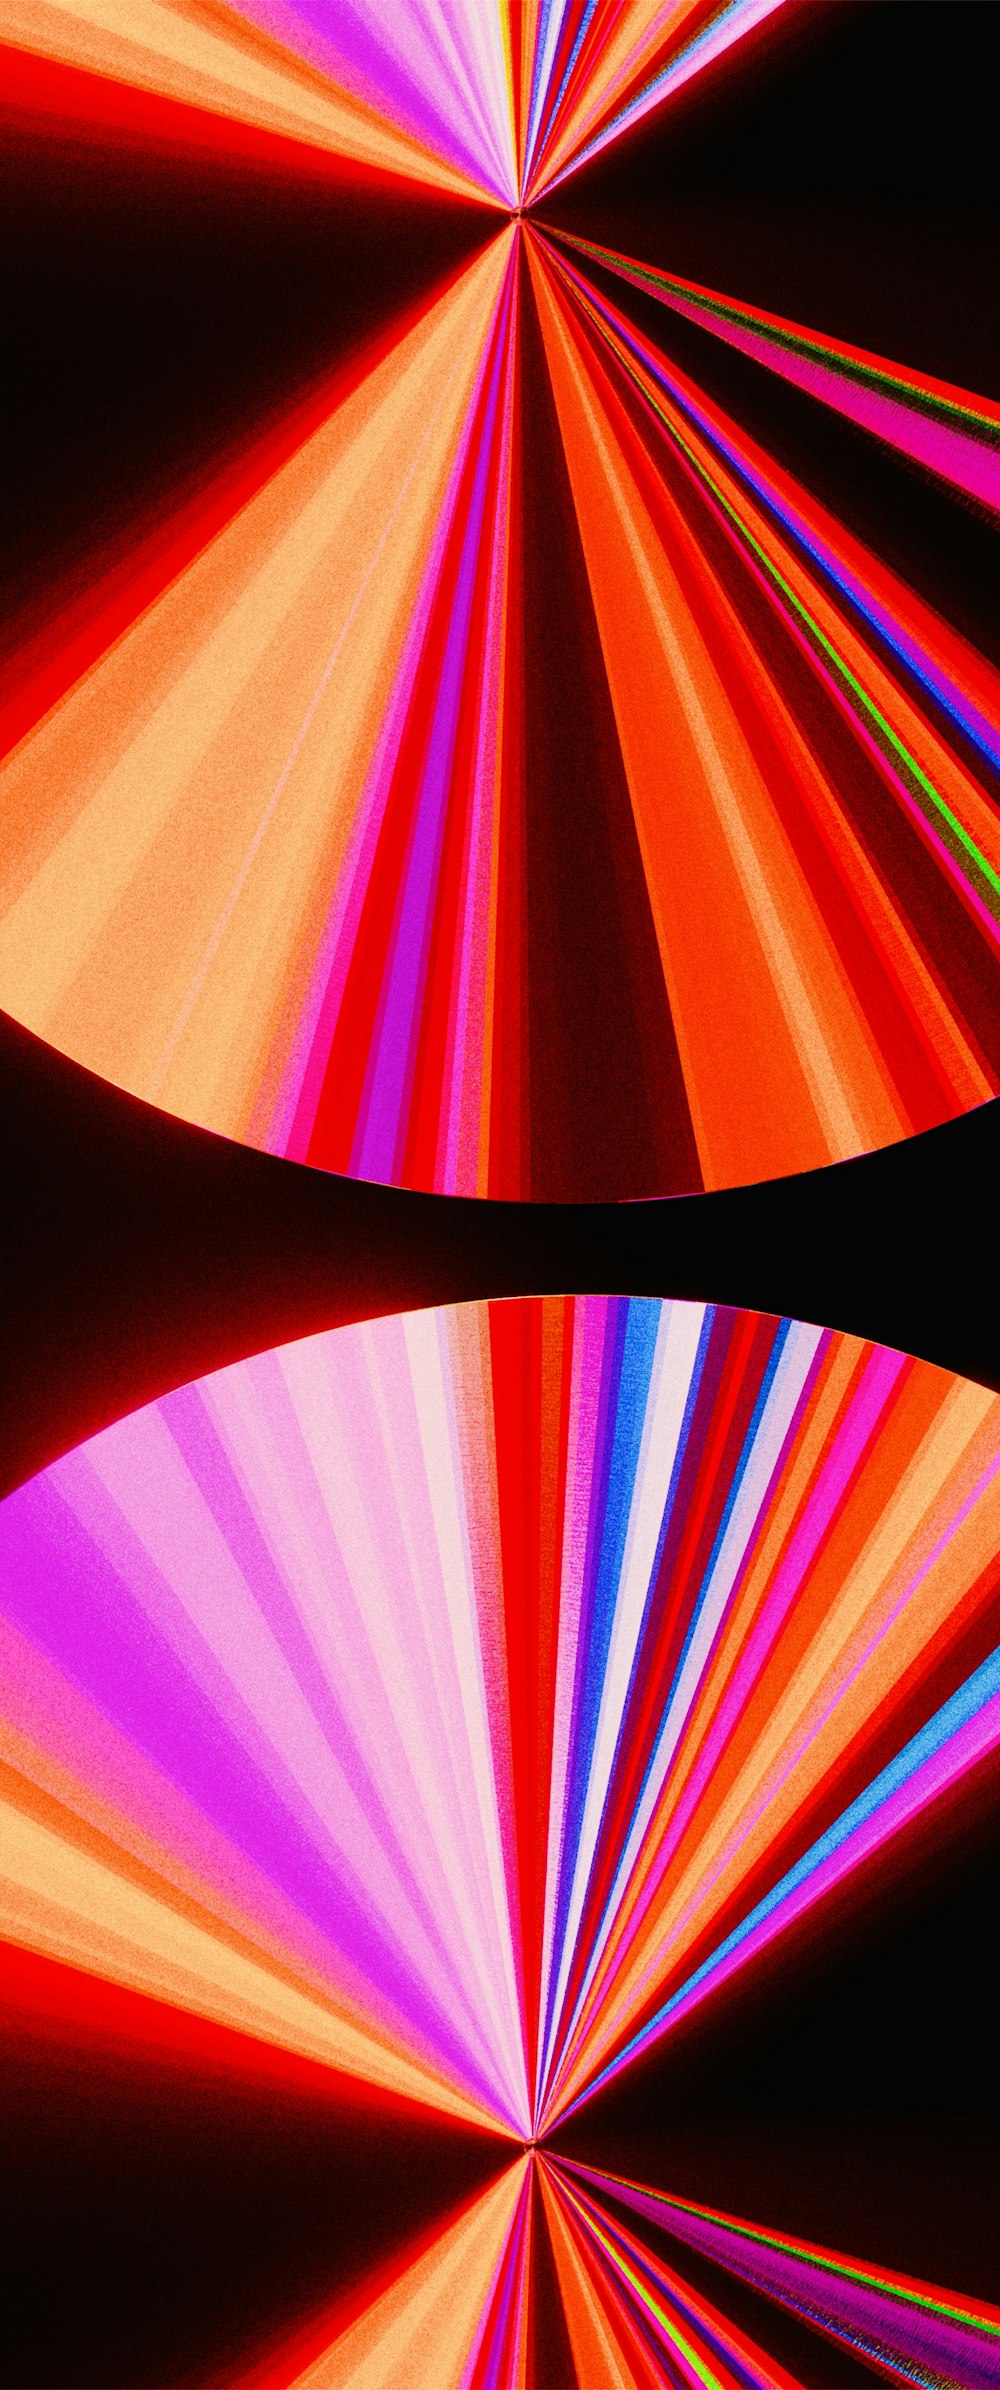 an abstract image of a multicolored umbrella